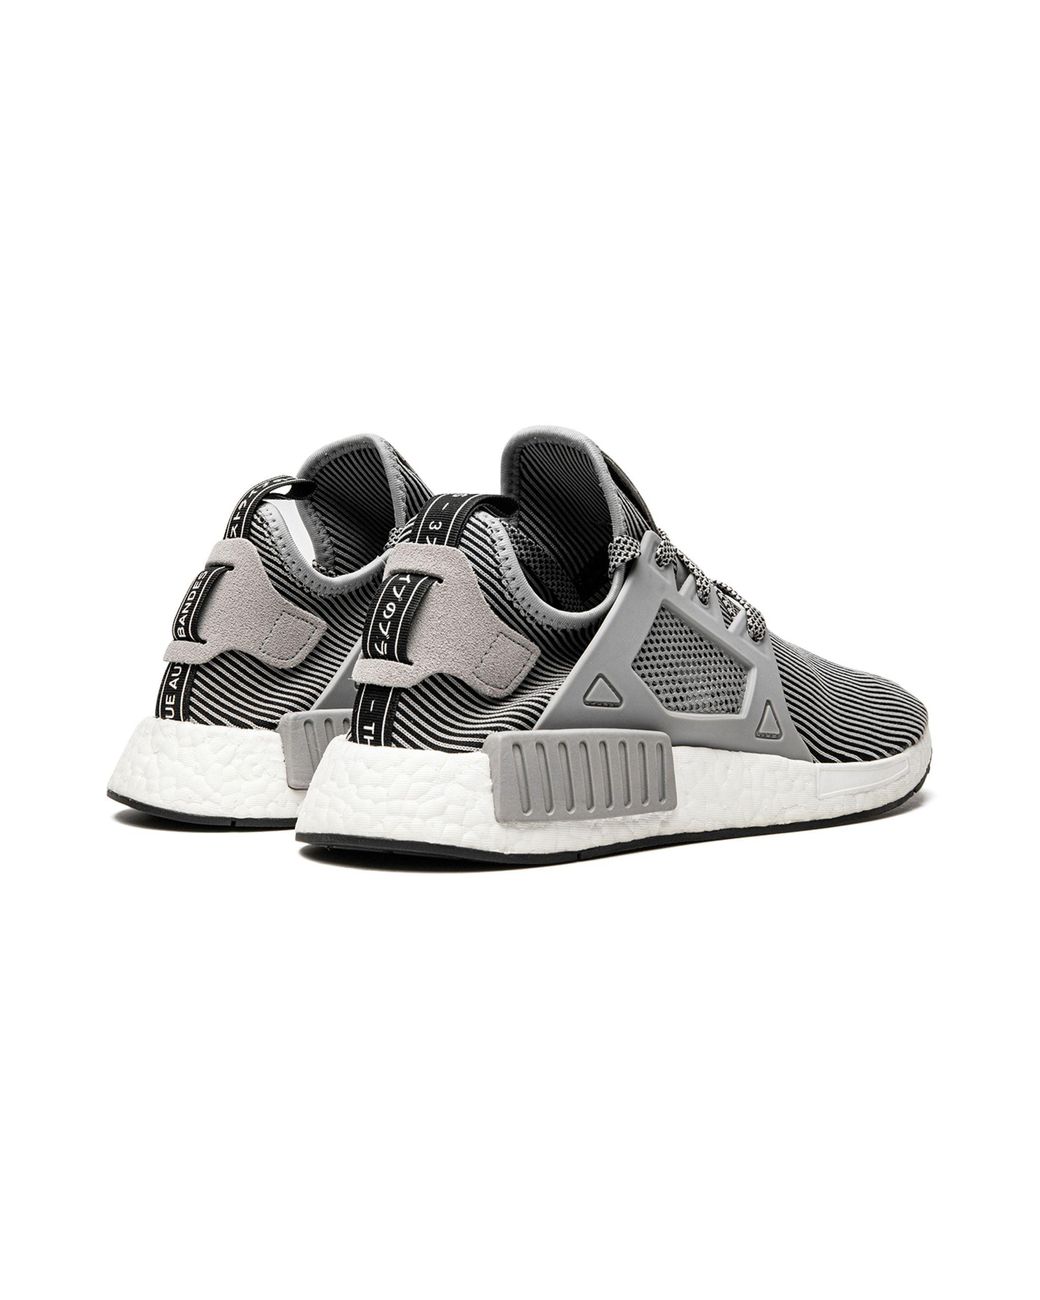 adidas Nmd Xr1 Pk Shoes in Black | Lyst UK